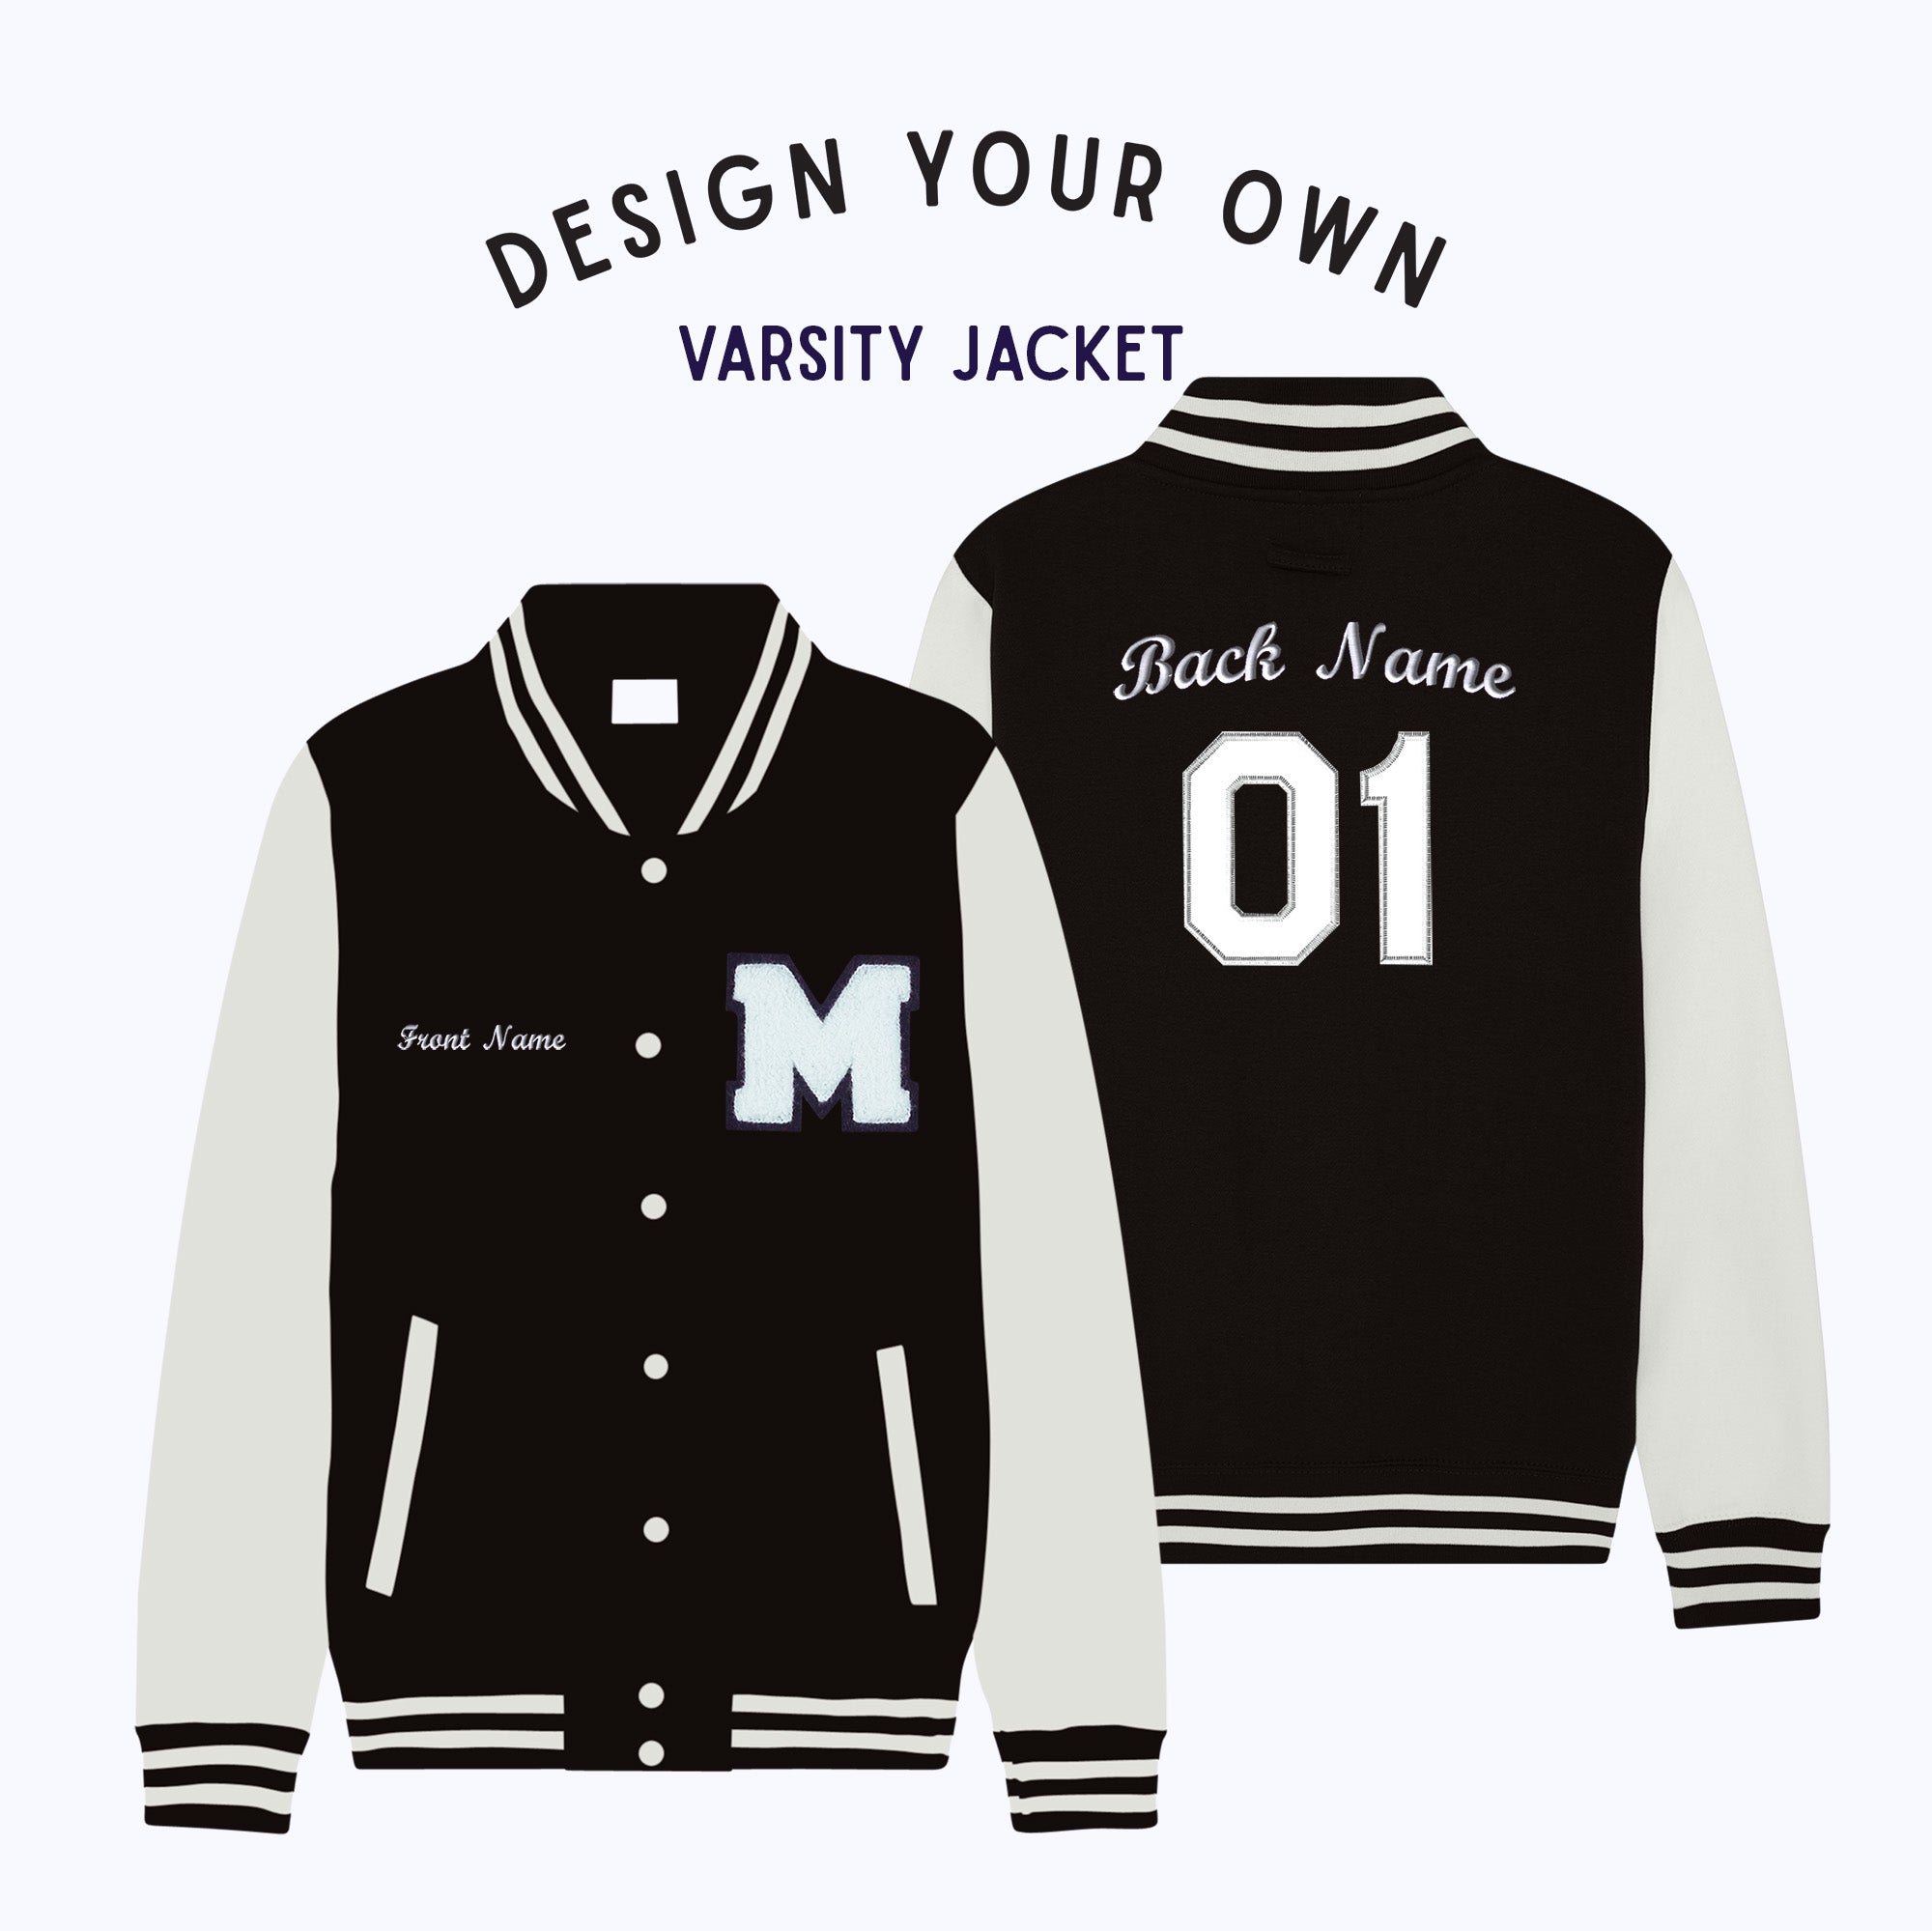 INK STITCH Unisex Jst58 Custom Embroidery Add Logo Texts Personalized  Insulated Varsity Jackets - Black (XS) at Amazon Men's Clothing store